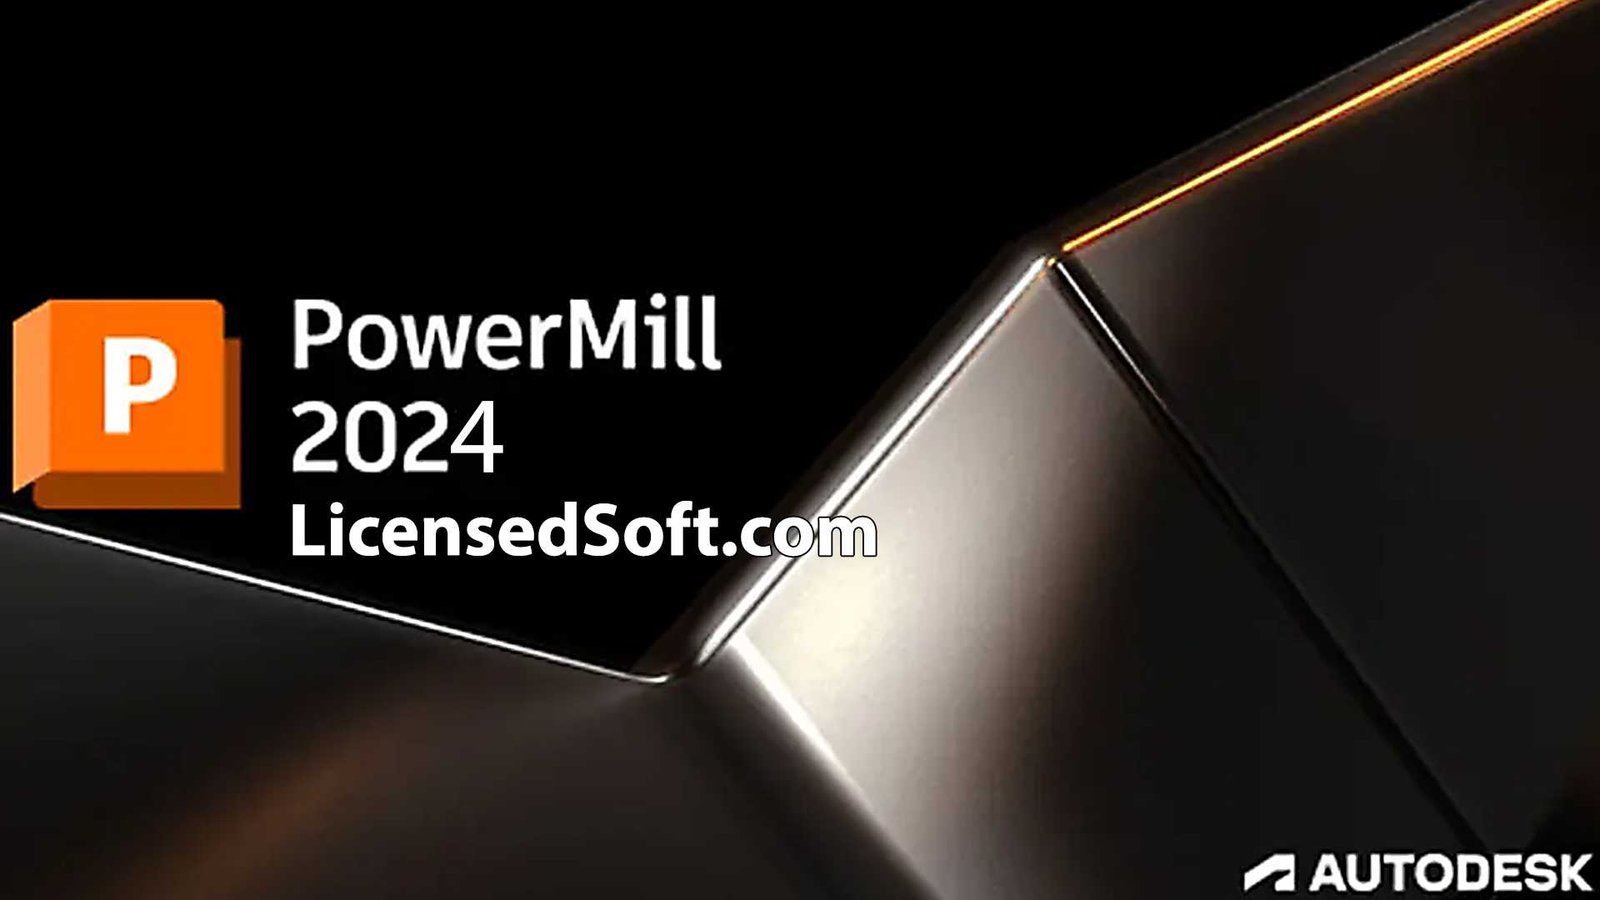 Autodesk Powermill Ultimate 2024.0.1 Lifetime License Cover Image By LicensedSoft